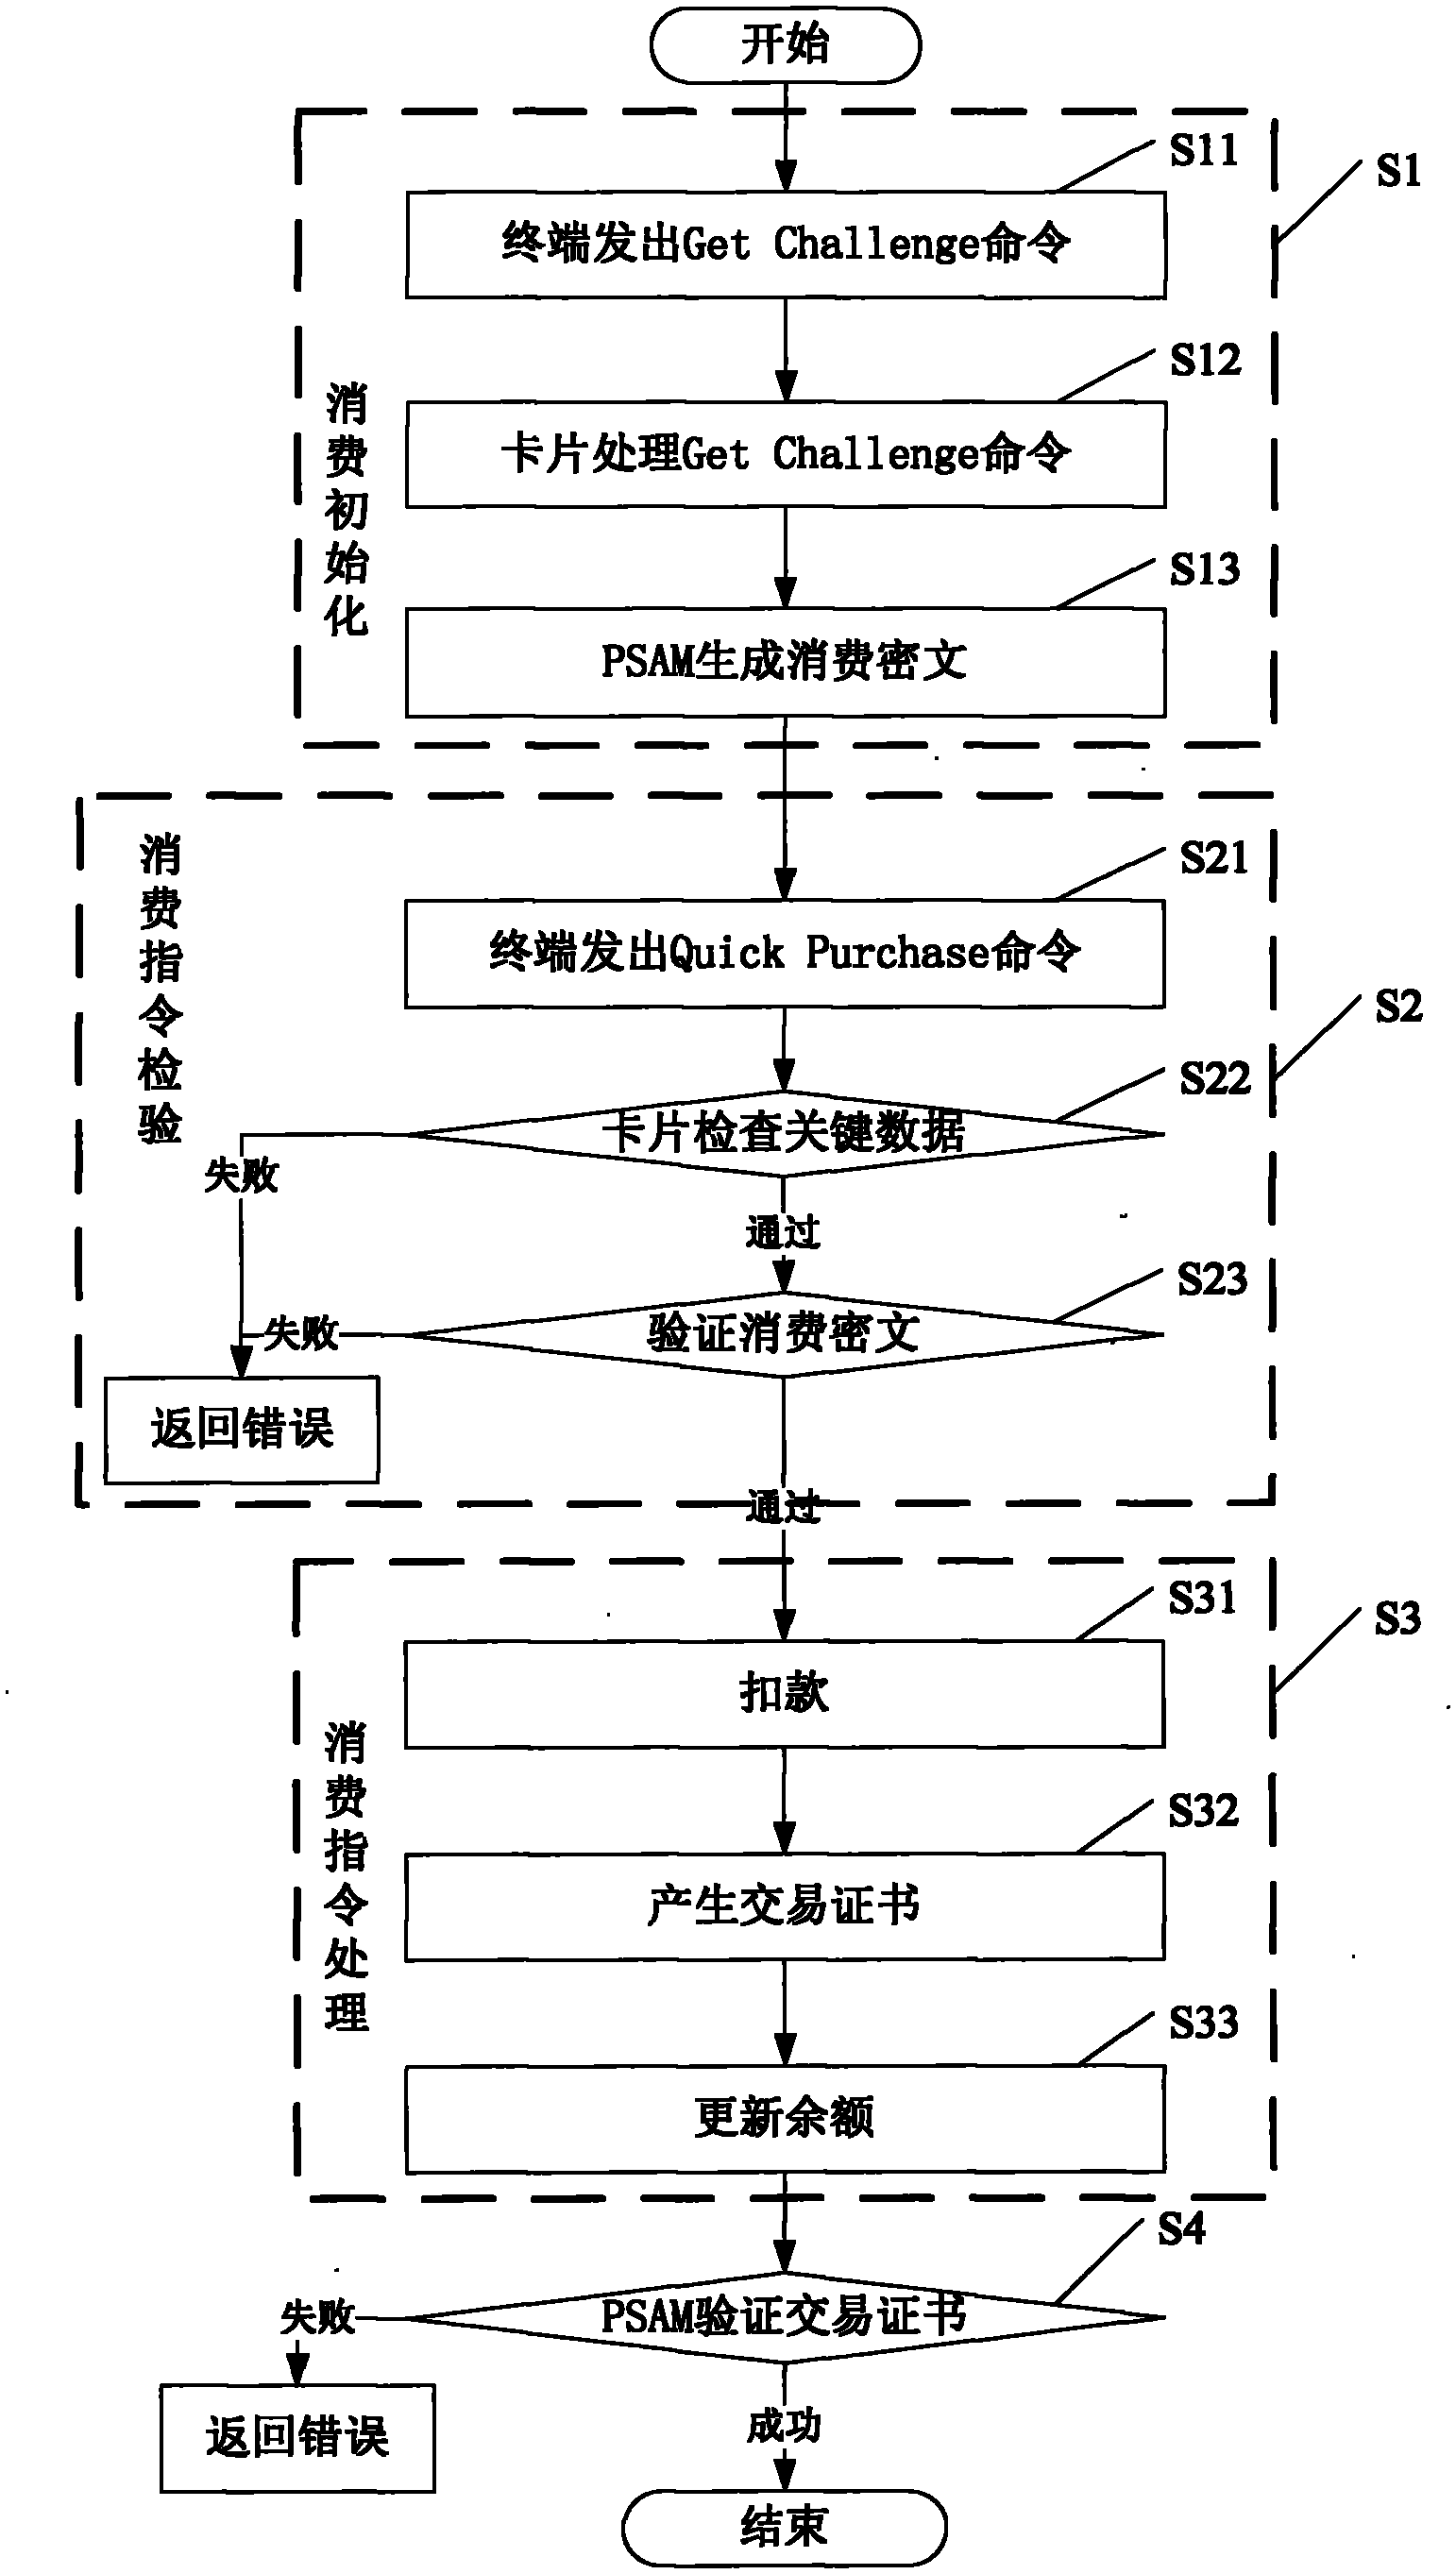 Instantaneous consumption application processing method and system for intelligent card